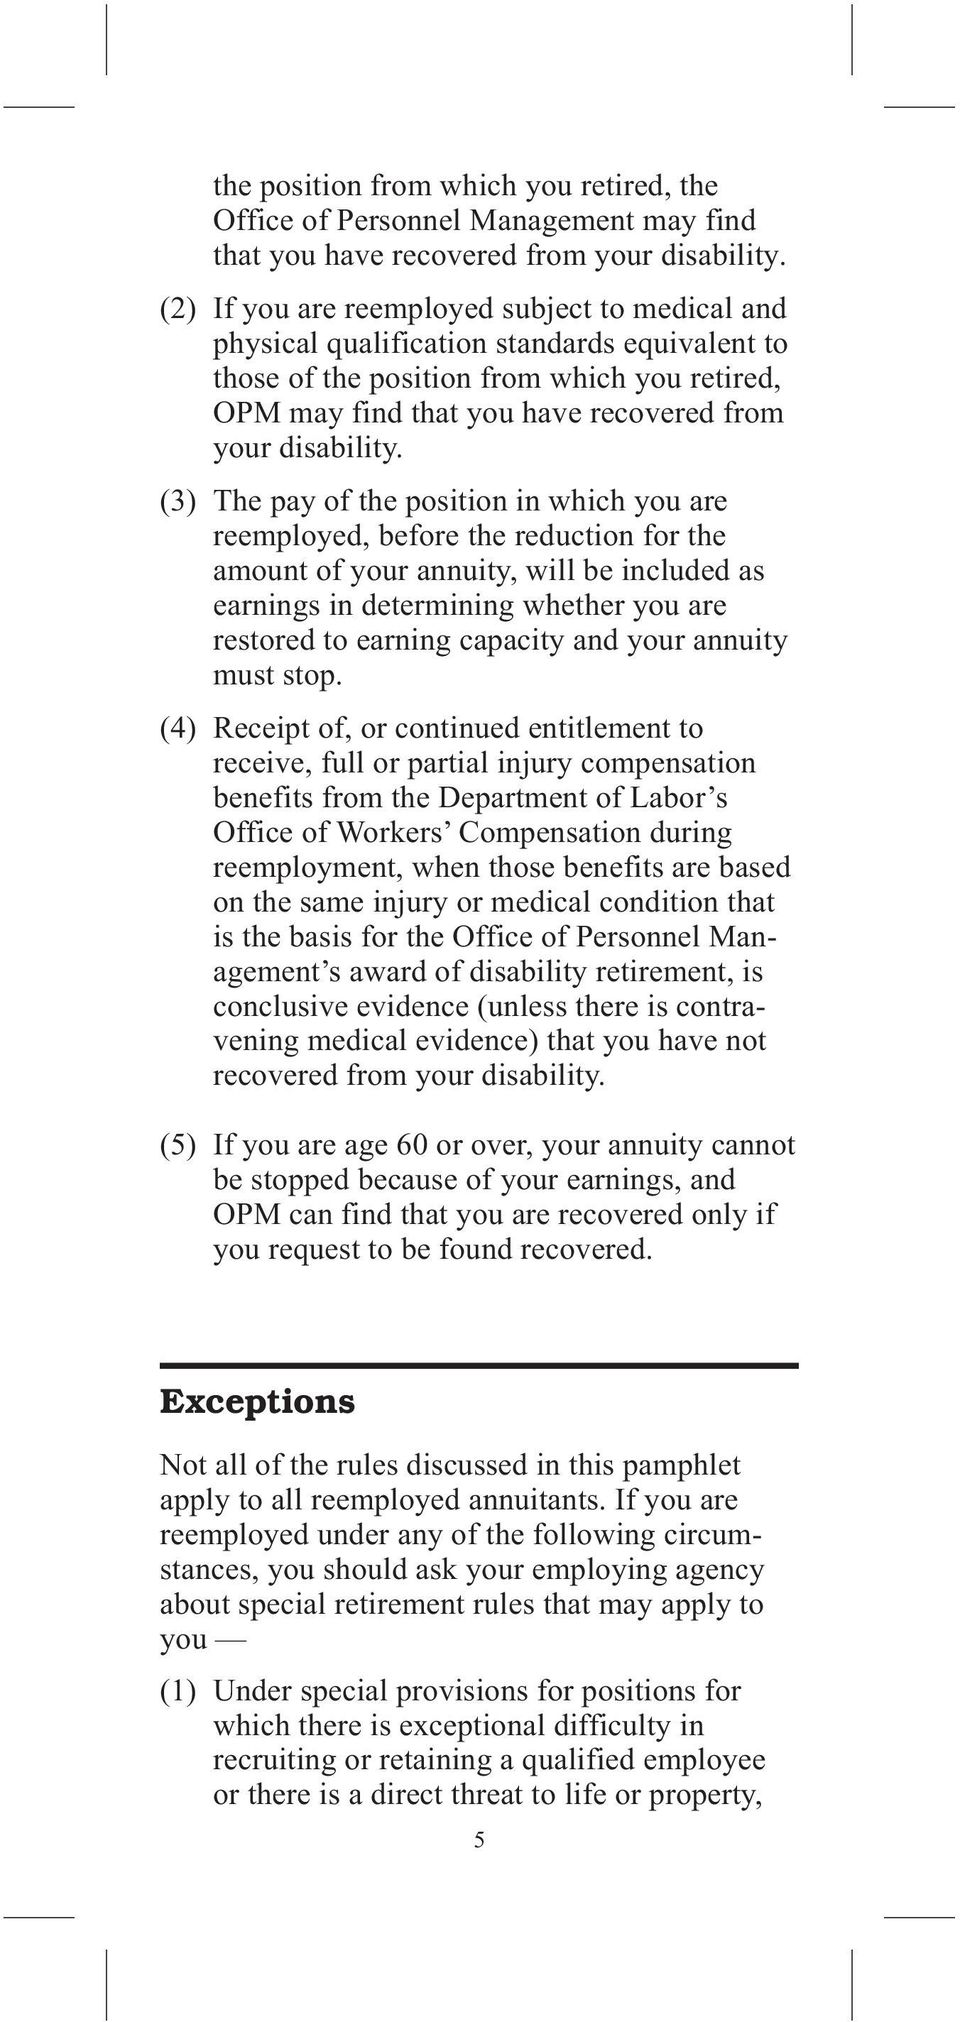 (3) The pay of the position in which you are reemployed, before the reduction for the amount of your annuity, will be included as earnings in determining whether you are restored to earning capacity